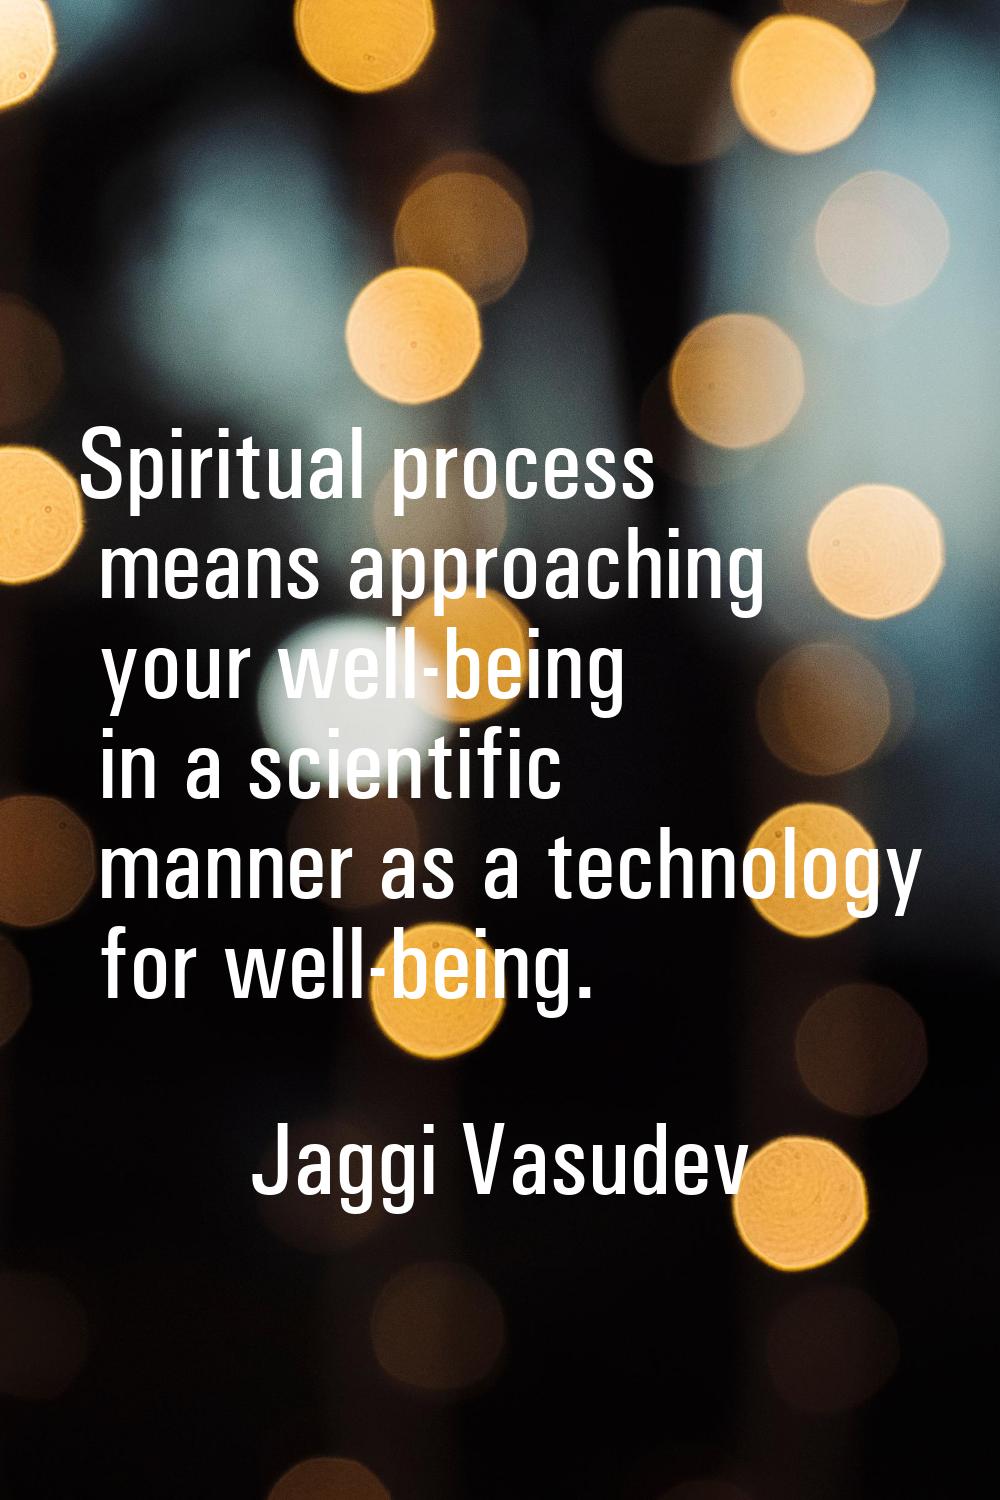 Spiritual process means approaching your well-being in a scientific manner as a technology for well